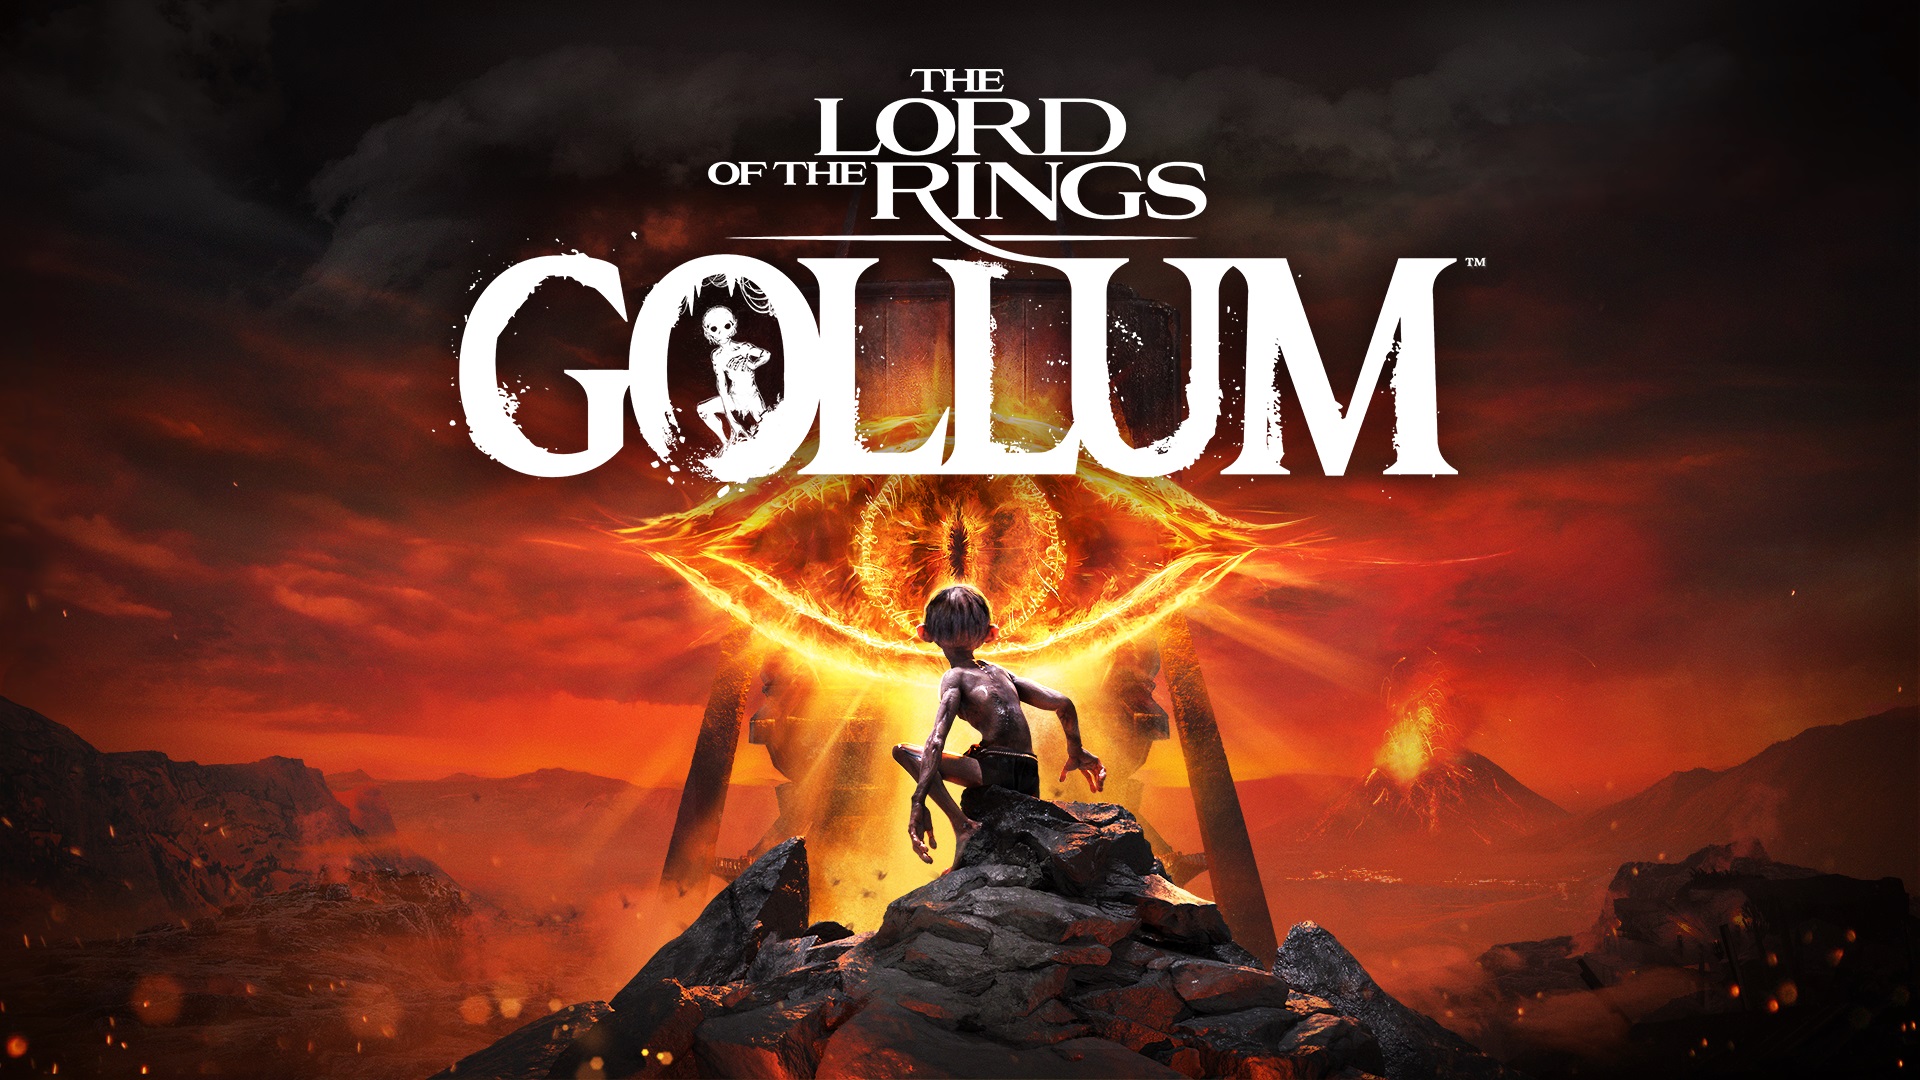 The Lord of the Rings: Gollum review roundup